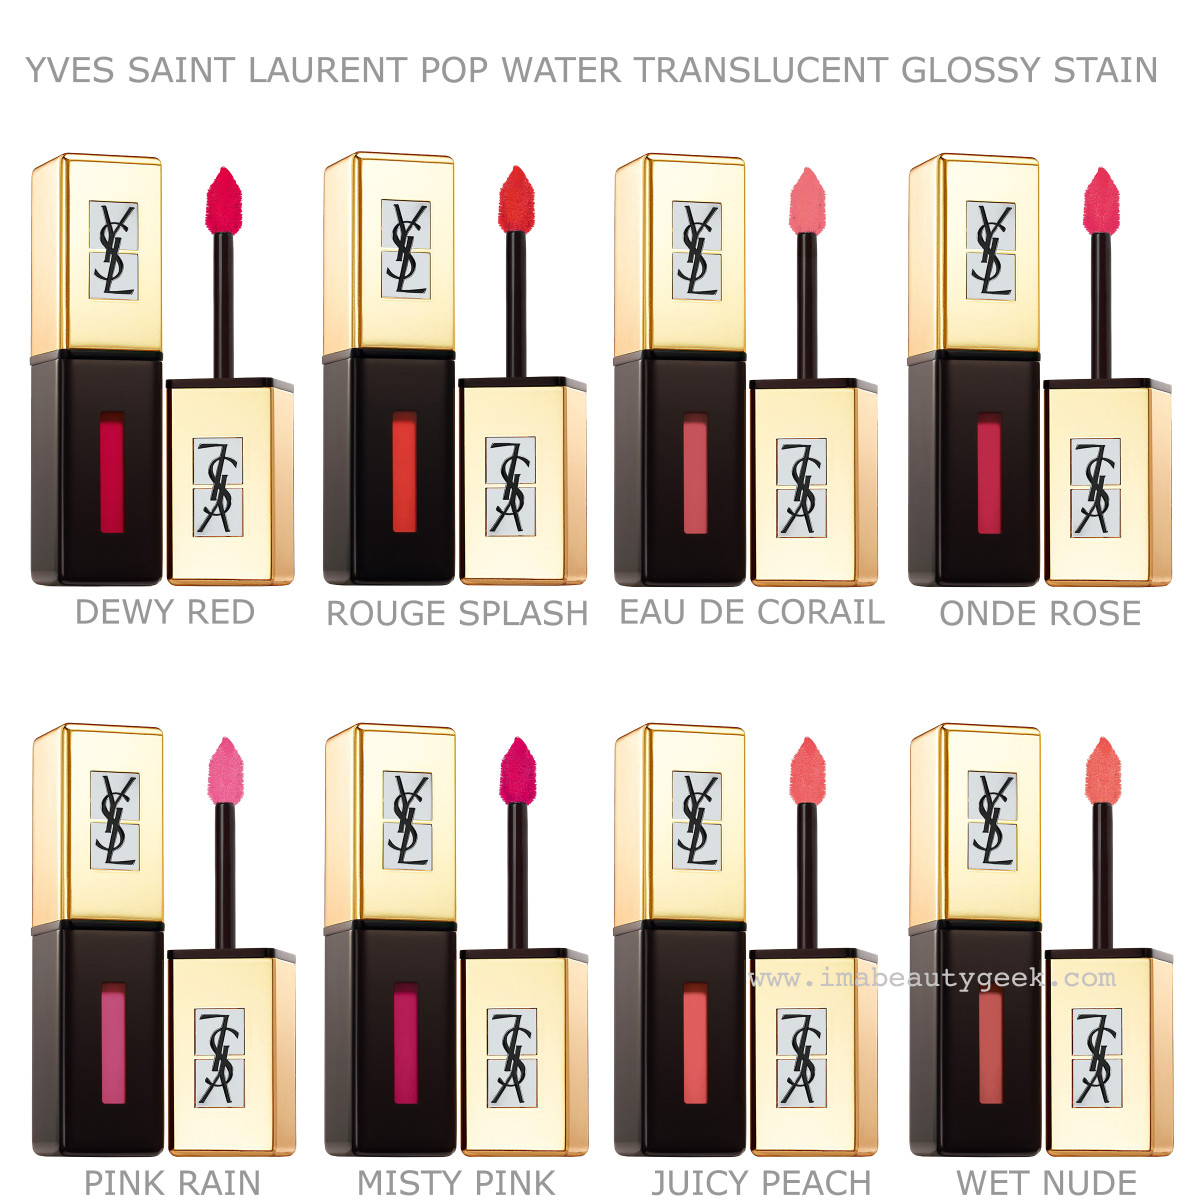 YSL Summer 2015 Pop Water Glossy Stain Collection lip gloss